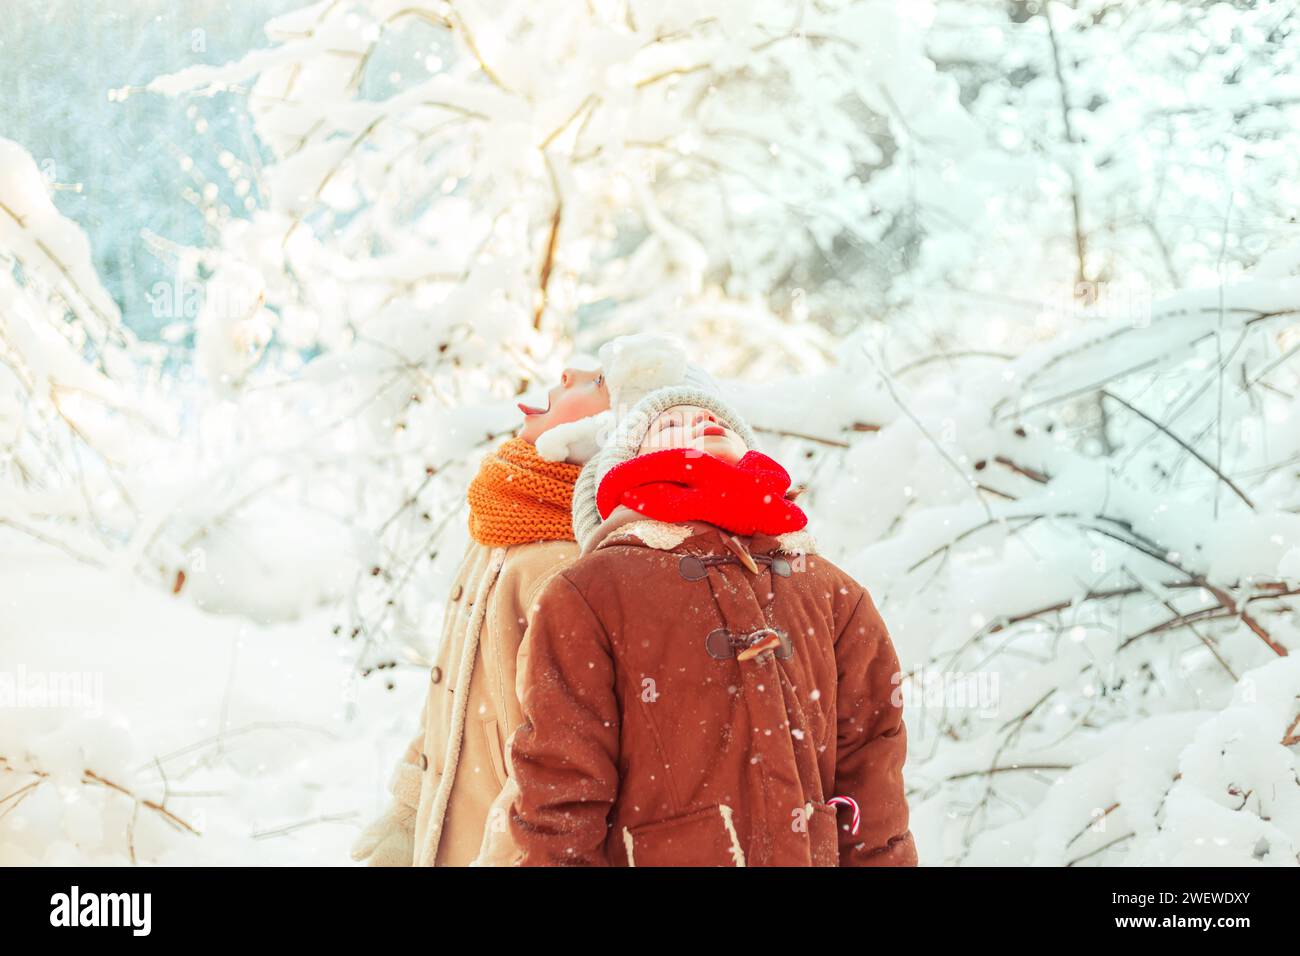 Children catch snowflakes with their mouths in a winter snowy forest. Frosty sunny day. Stock Photo